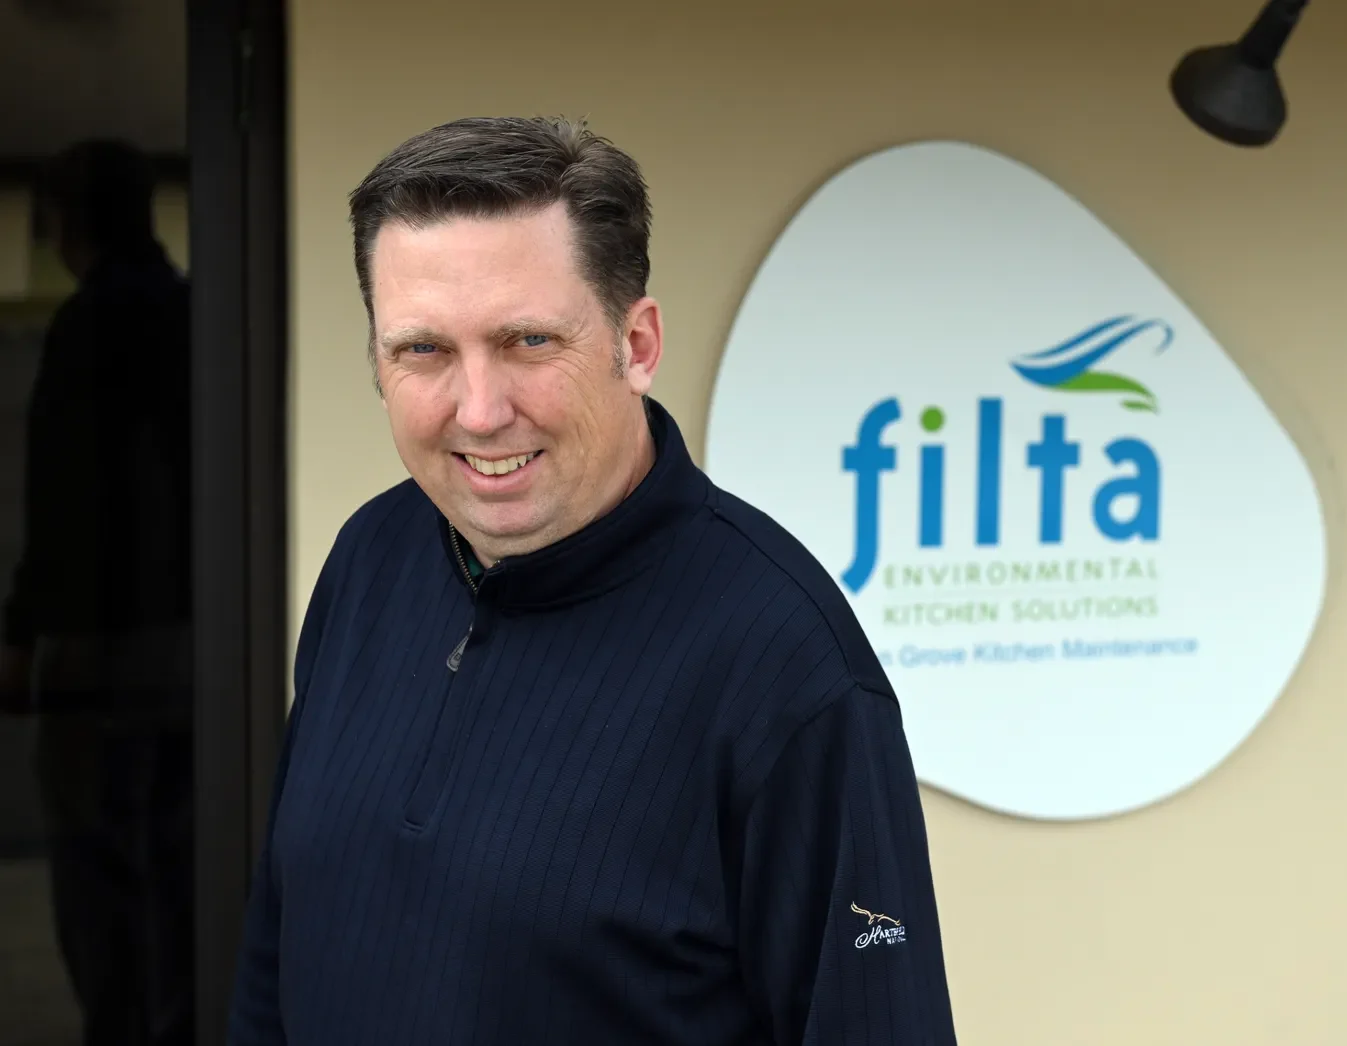 A person looking direct at camera while smiling with Filta logo in background